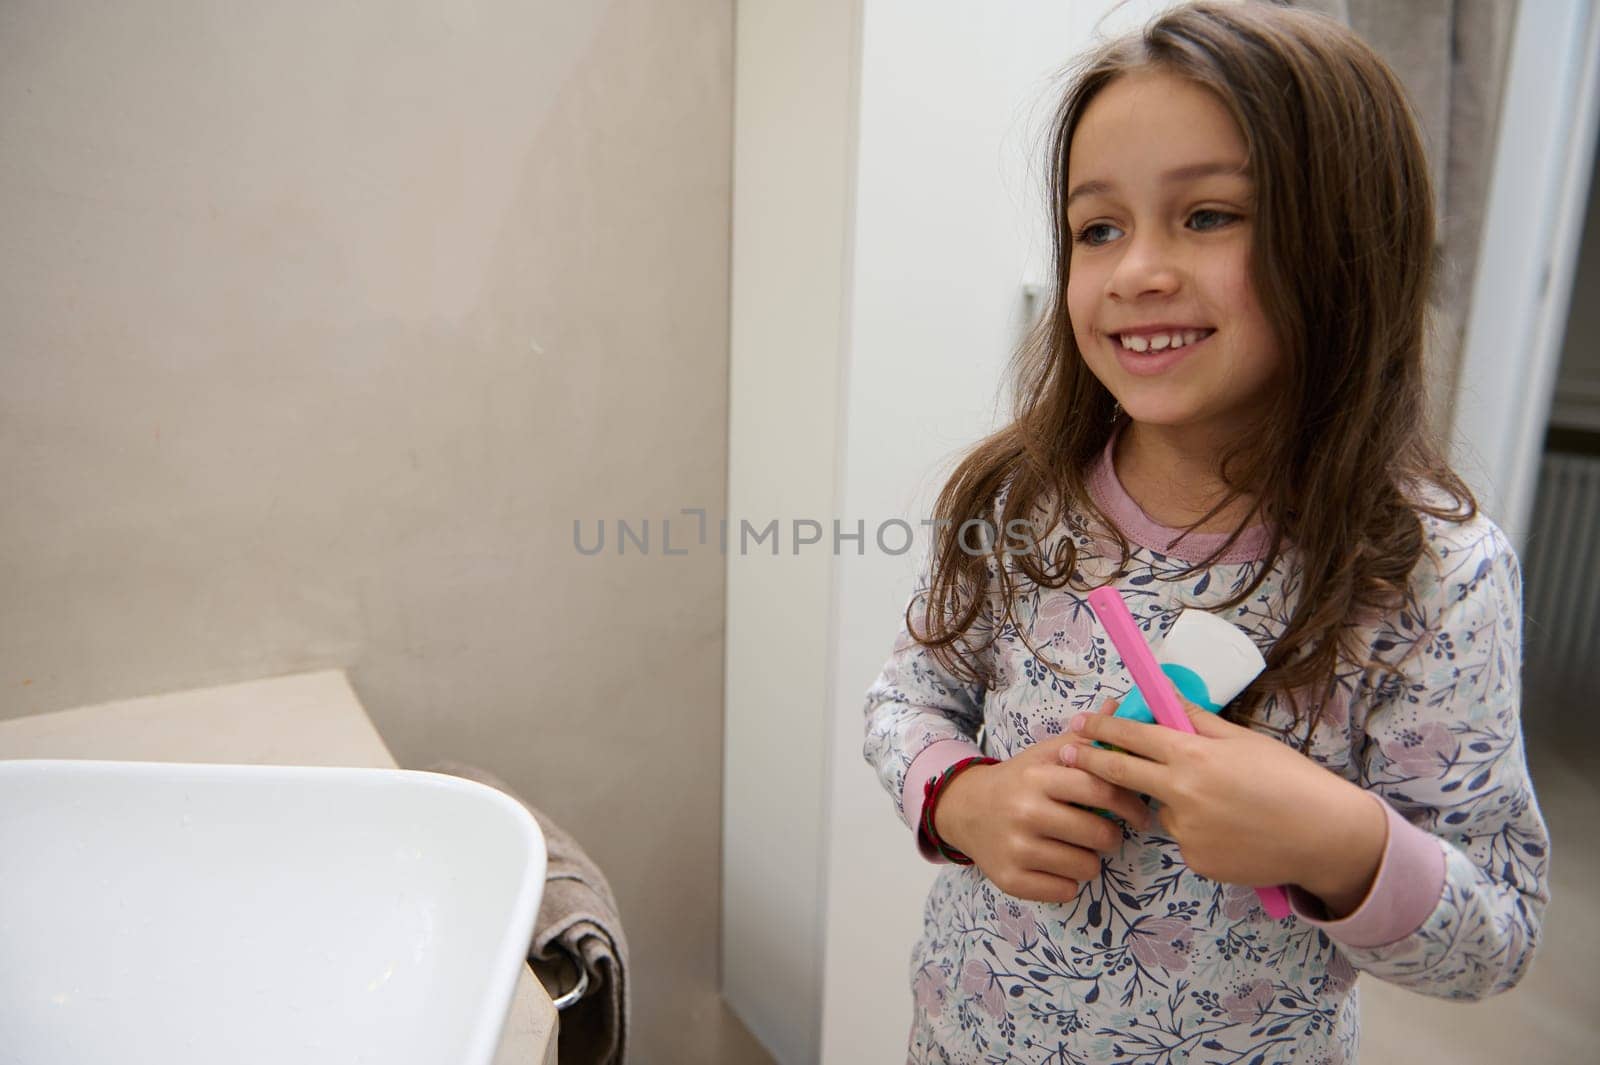 Little child girl in pajamas, holding kids toothpaste and her pink toothbrush, smiles looking at her mirror reflection, standing in a home bathroom before going to bed or when waking up in the morning